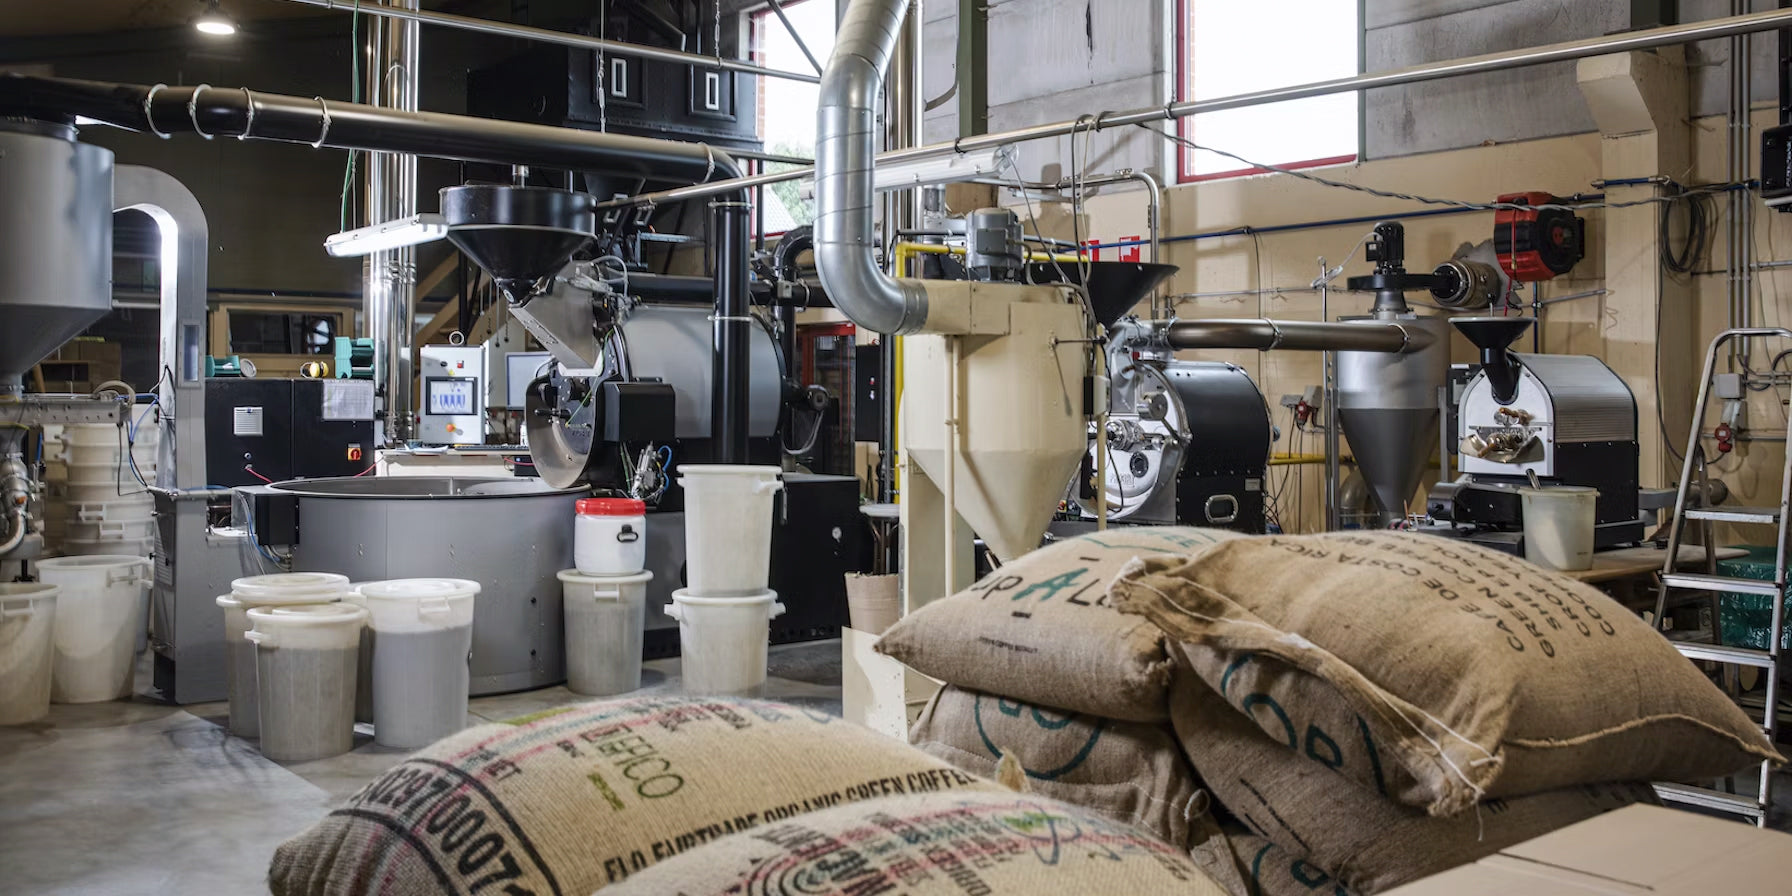 About OR Coffee Roasters